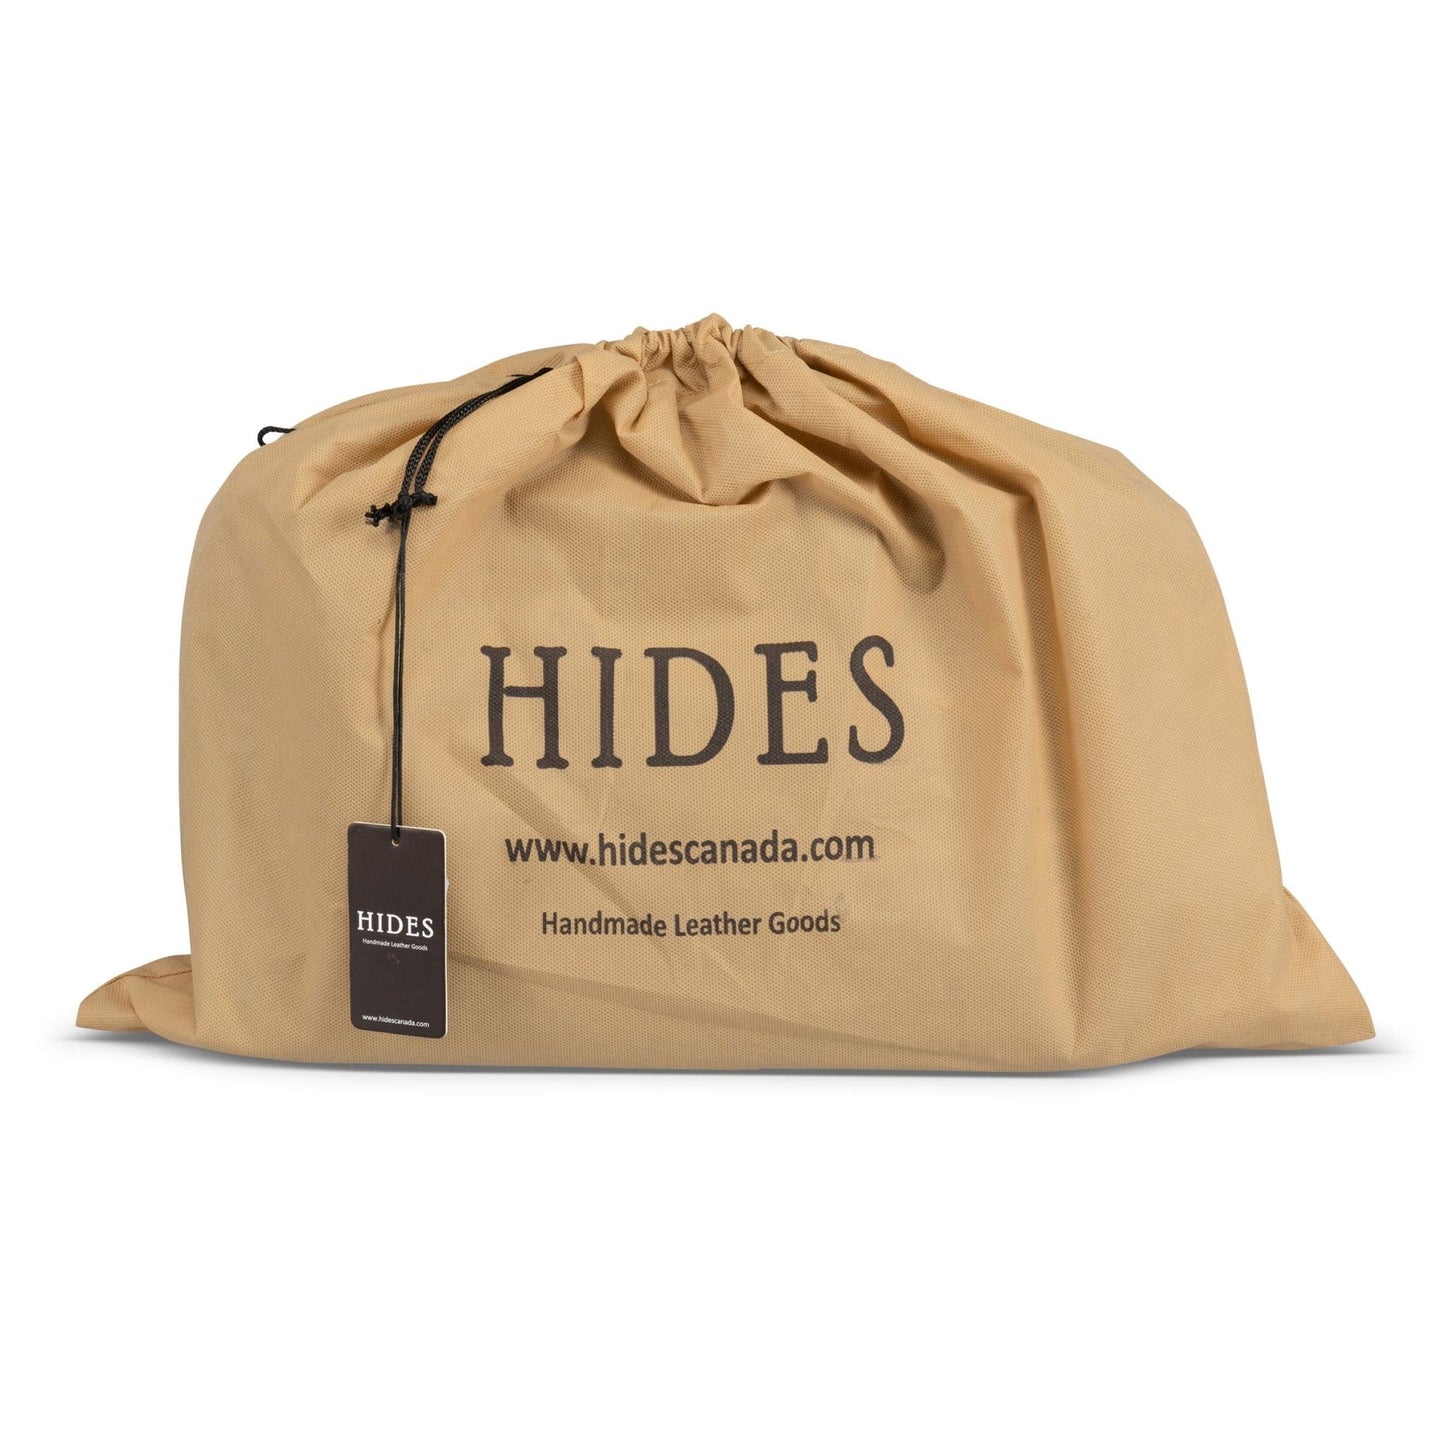 Military Leather Duffle Bag - HIDES